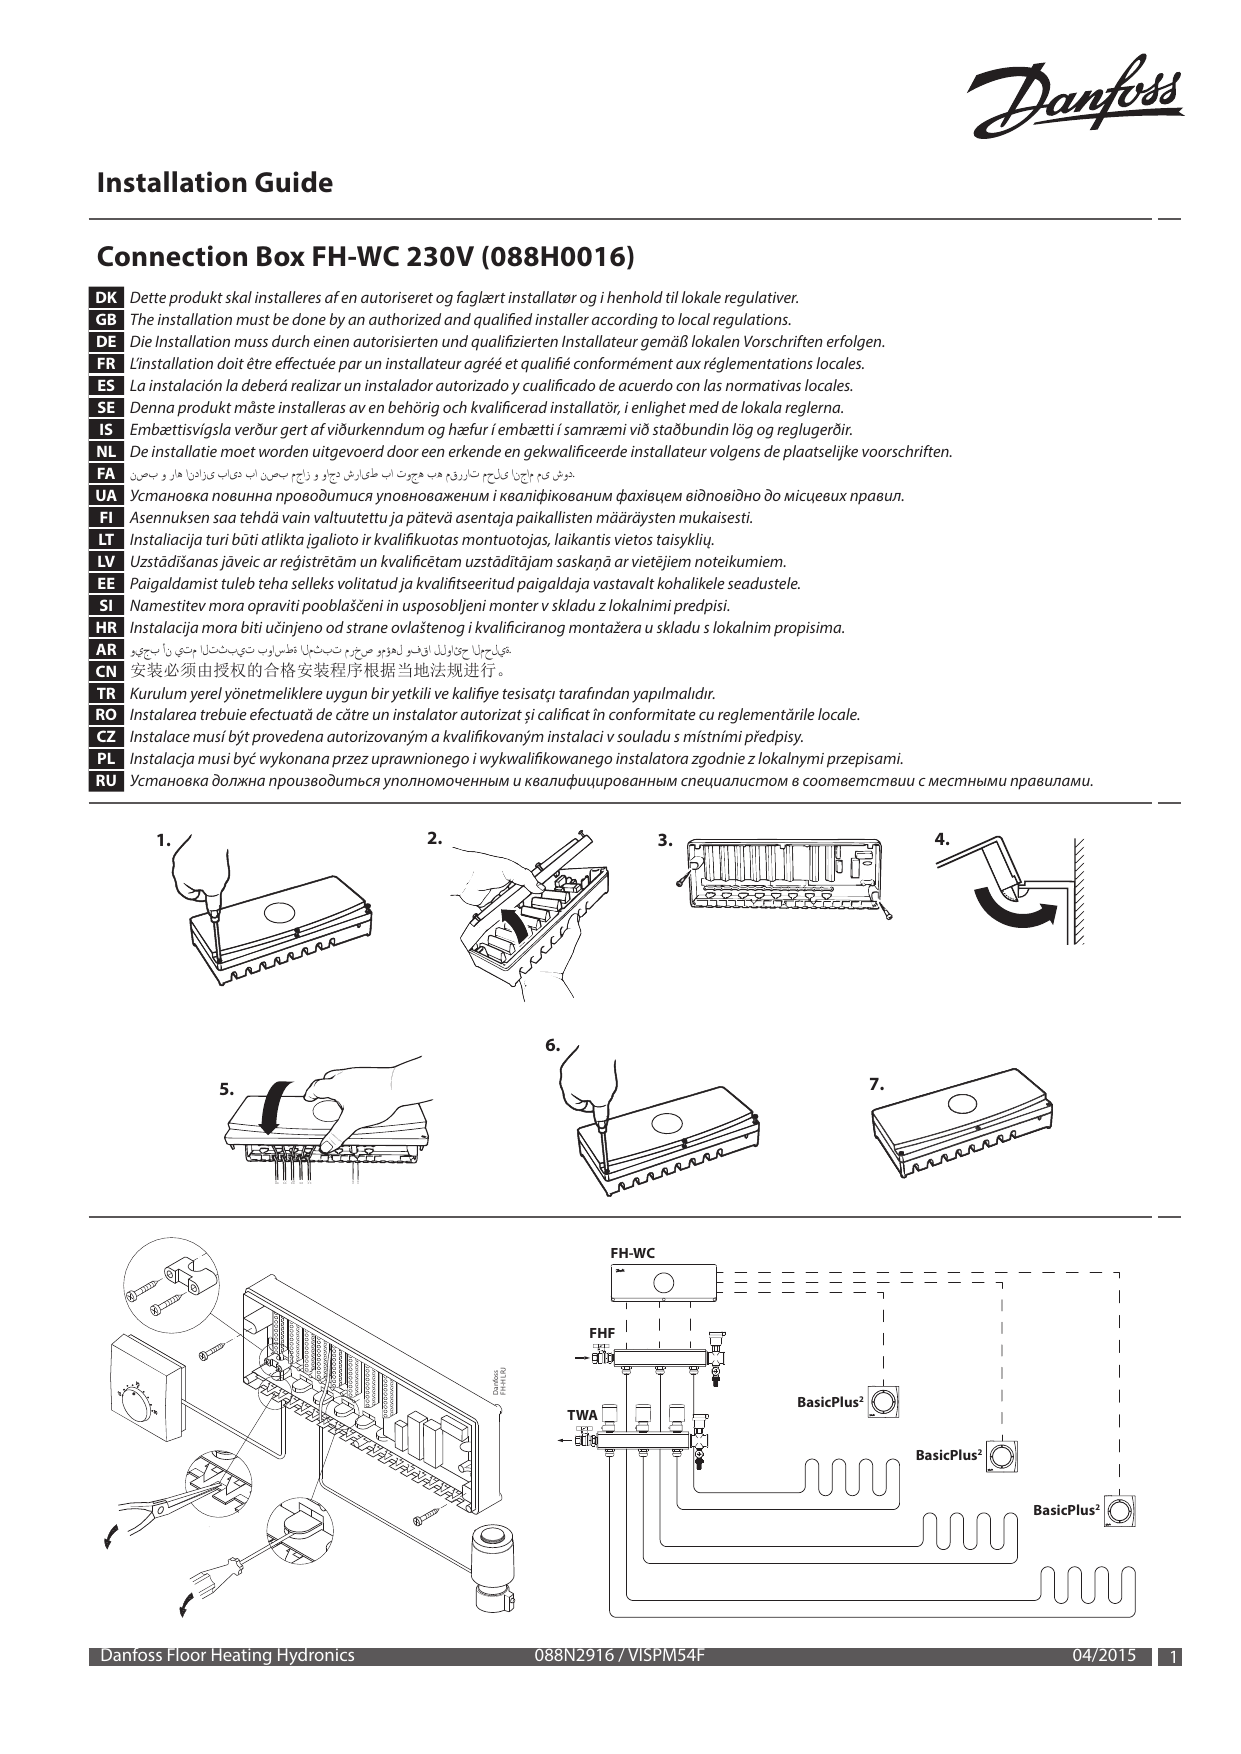 Danfoss Fh Wc Connection Box 230 V Installation Guide Manualzz